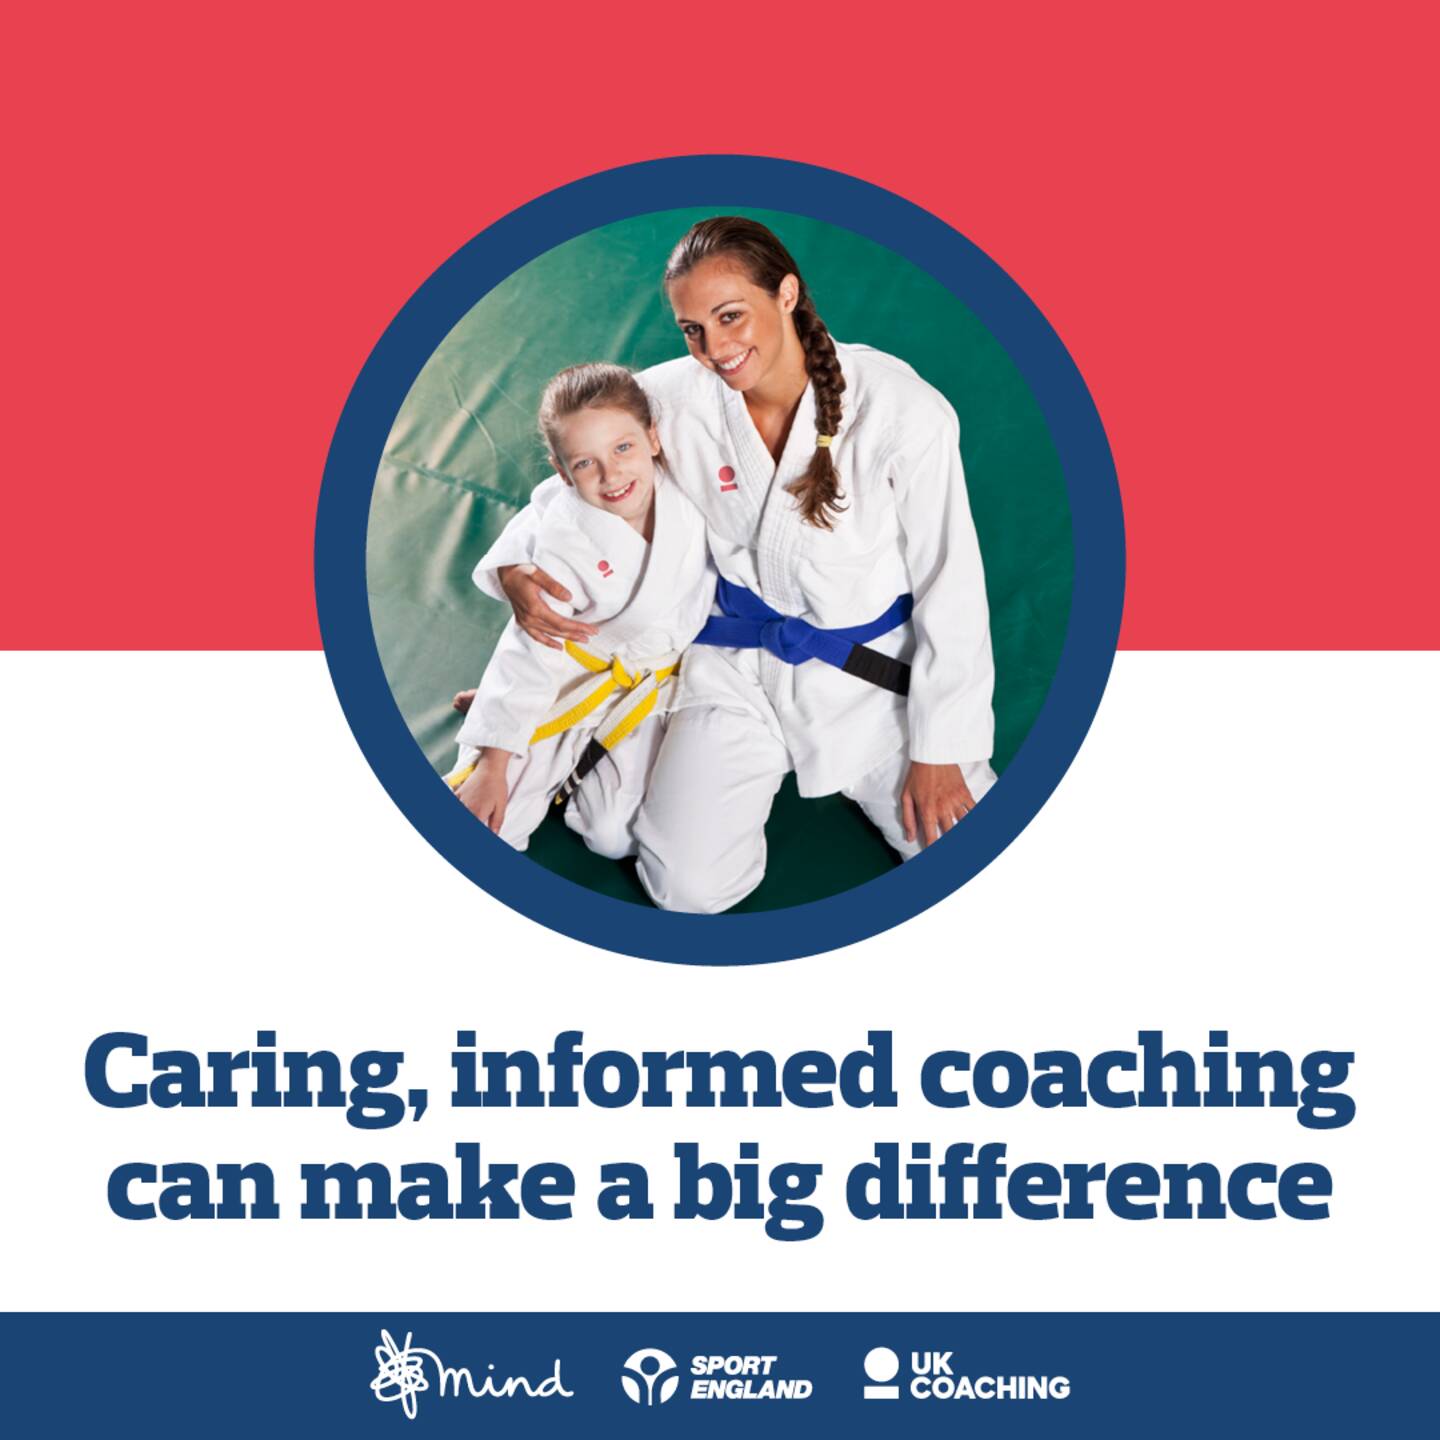 A woman and young girl in taekwondo kit, with the caption: Caring, informed coaching can make a big difference.